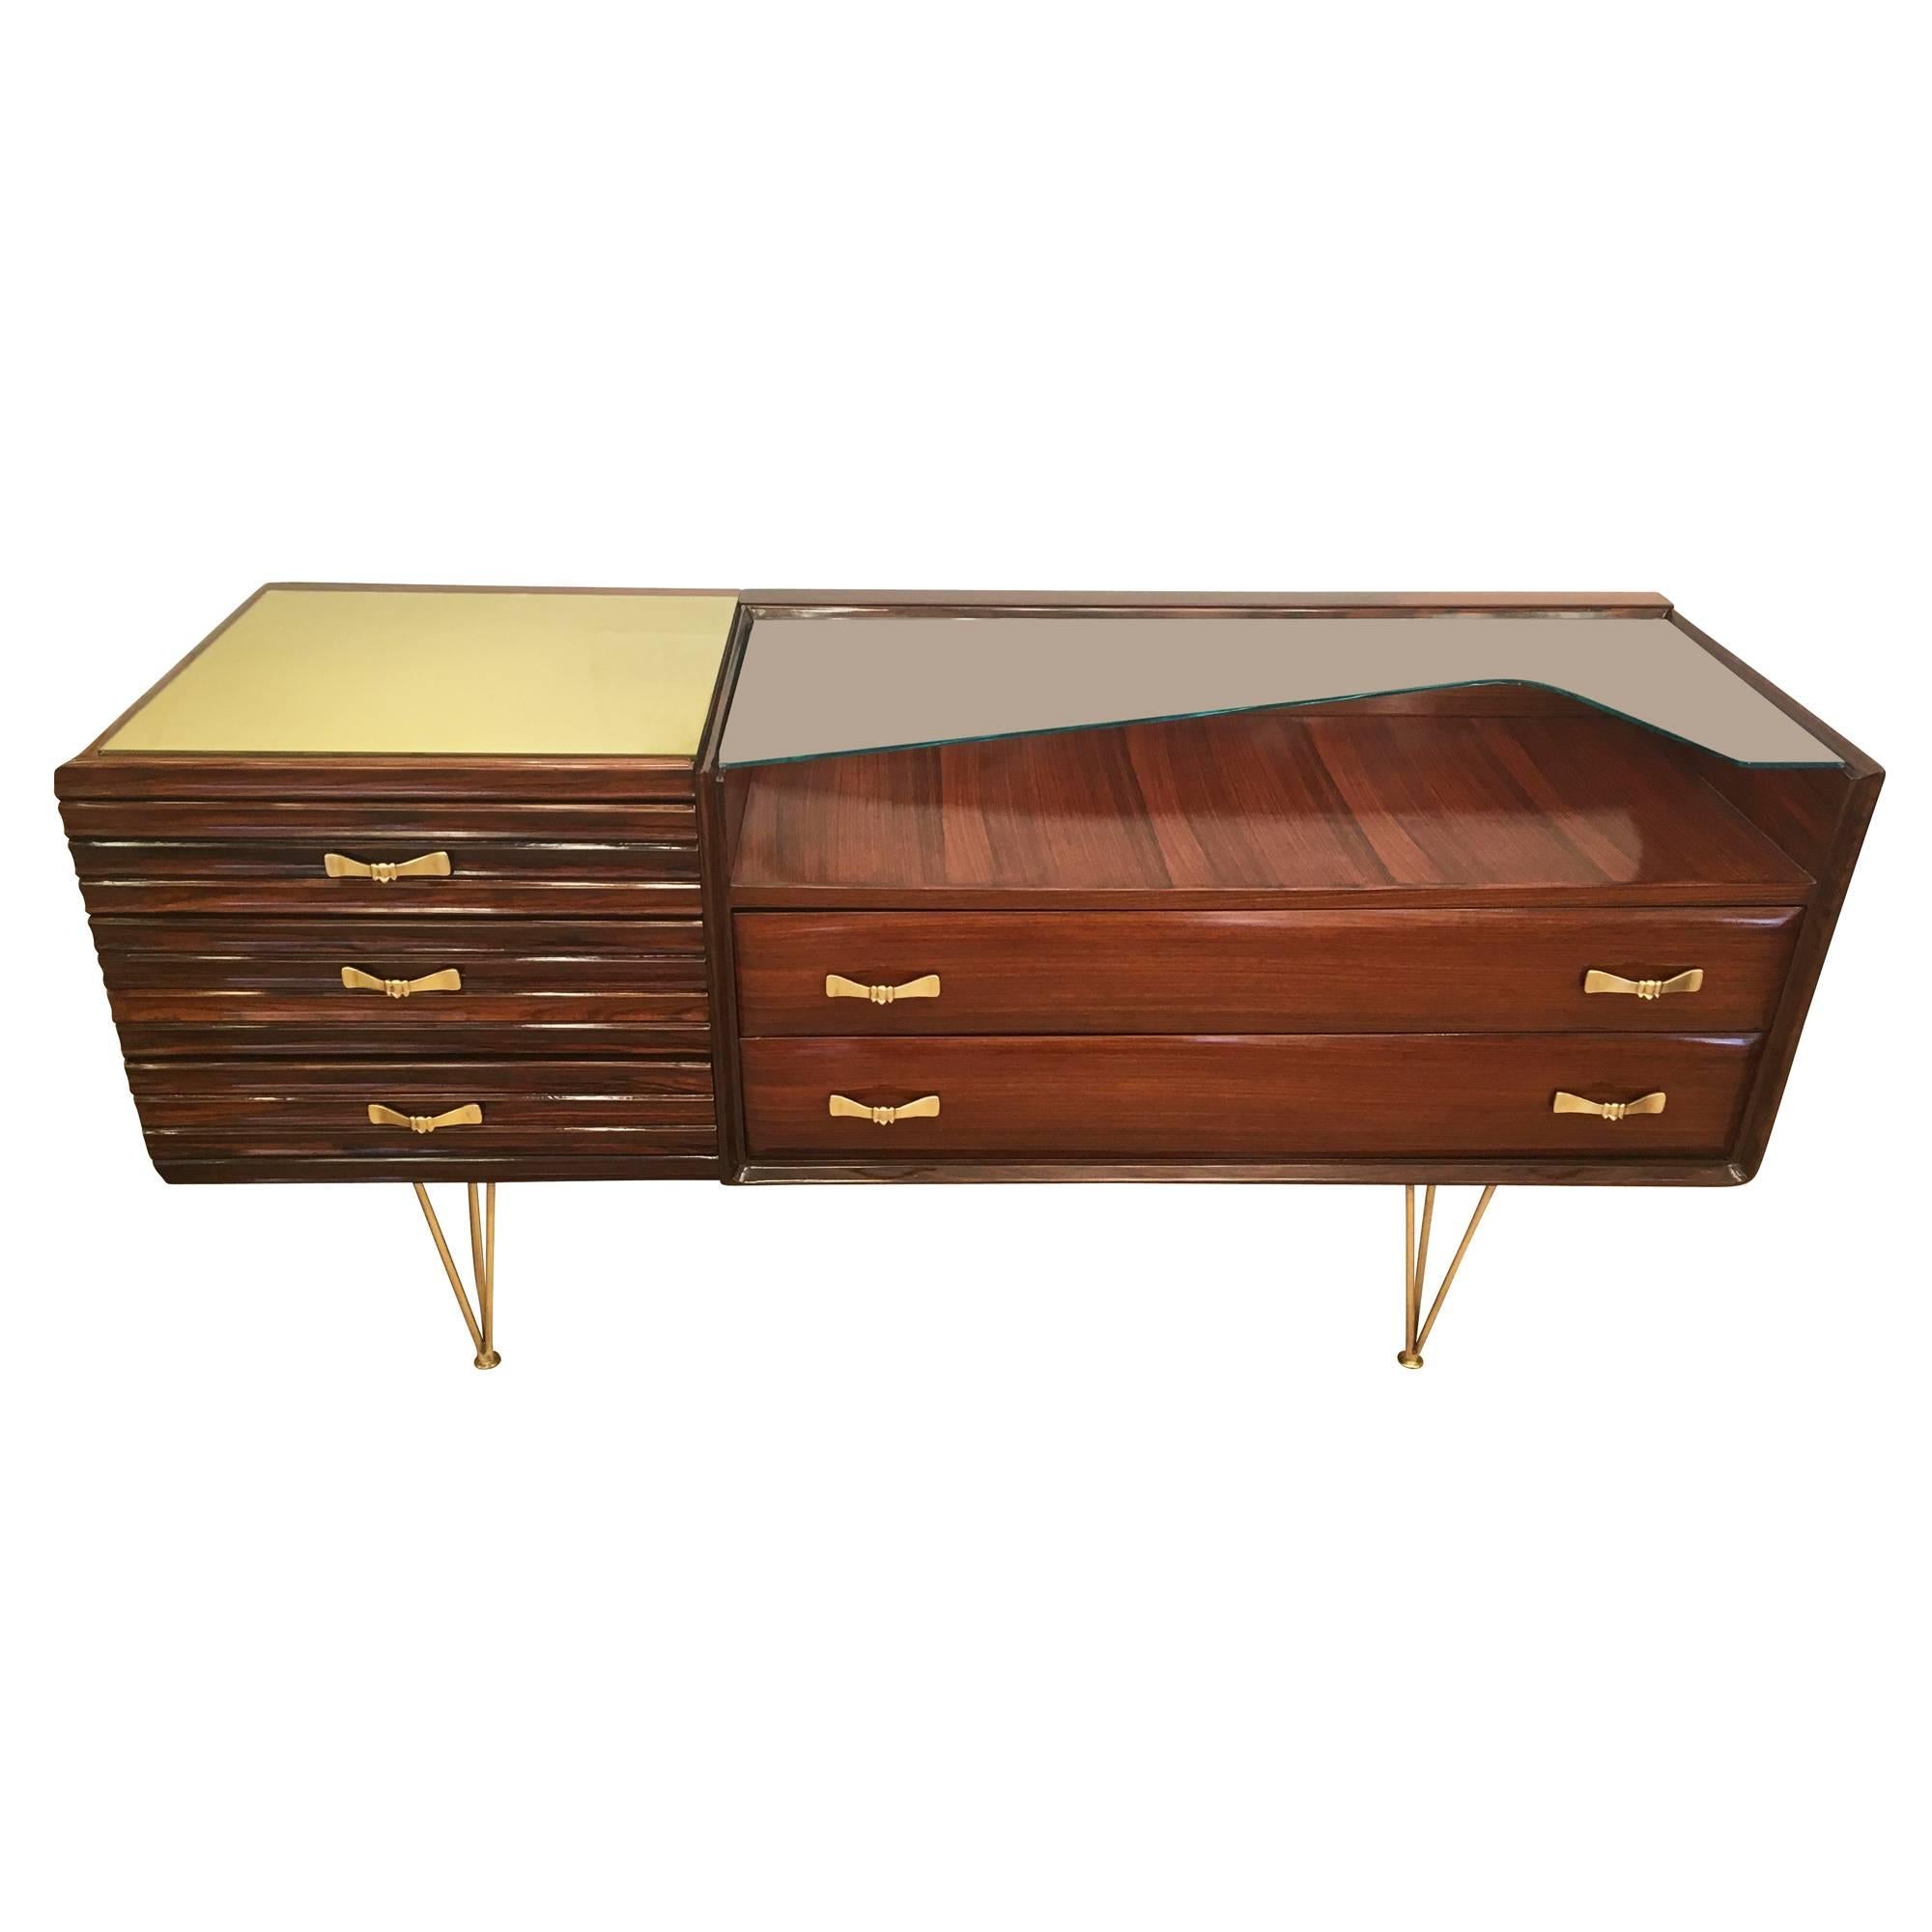 Attractive Italian dresser from the 1950 featuring some sculptural brass details. It has two glass tops: a square gold one to the left and a clear one on the right.

Available for viewing at Gaspare Asaro-Italian Modern in NYC